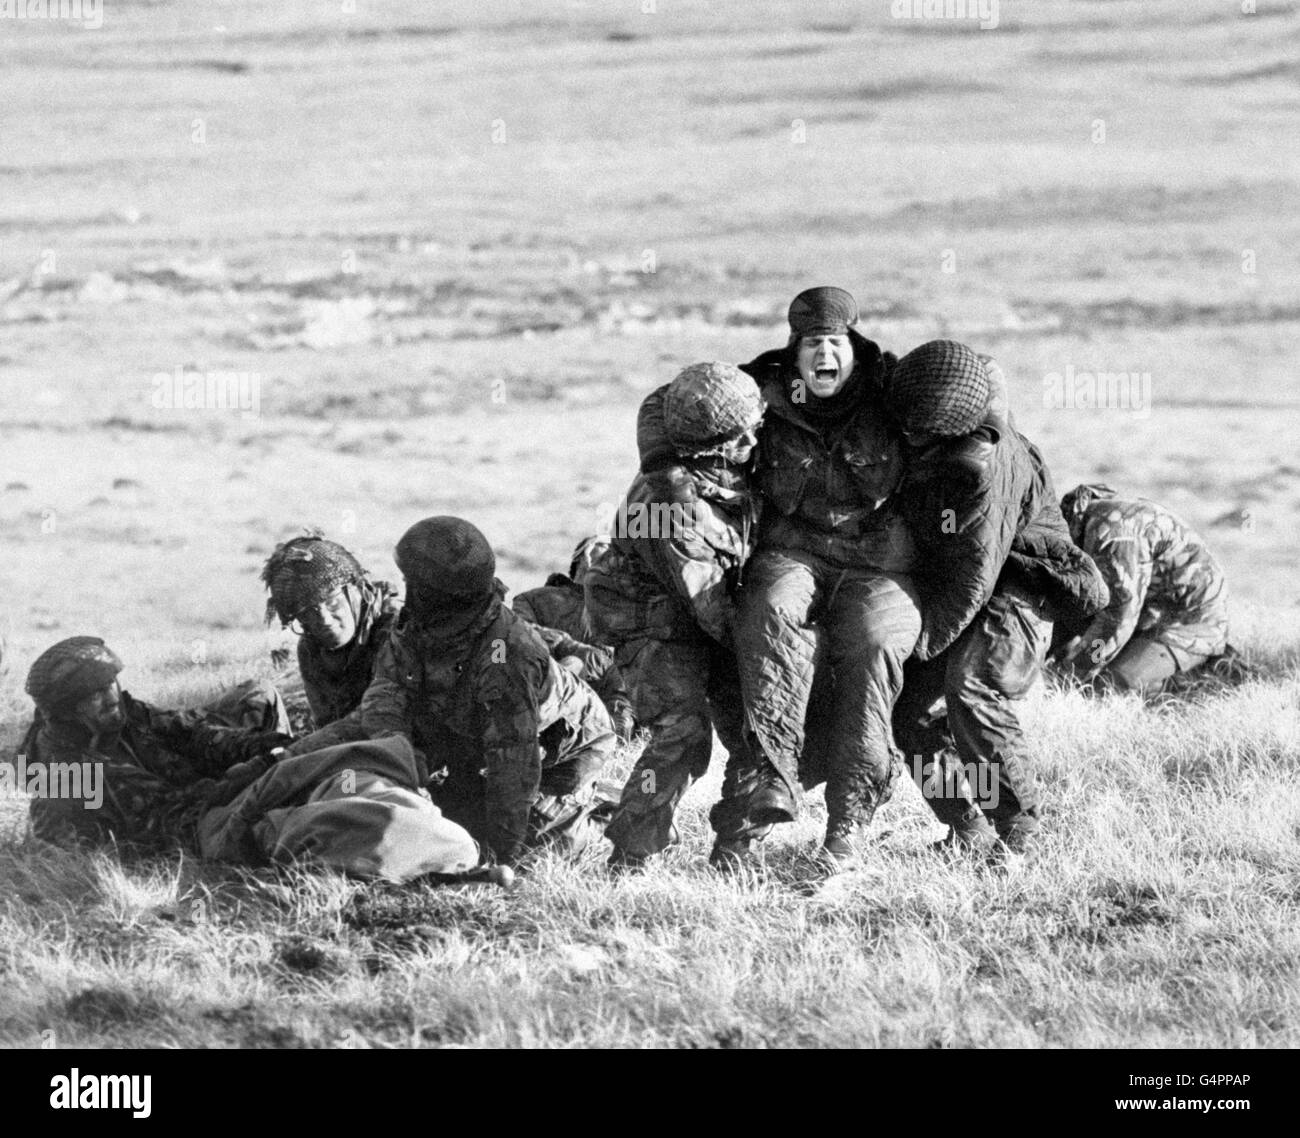 British paratroopers/Falklands campaign Stock Photo